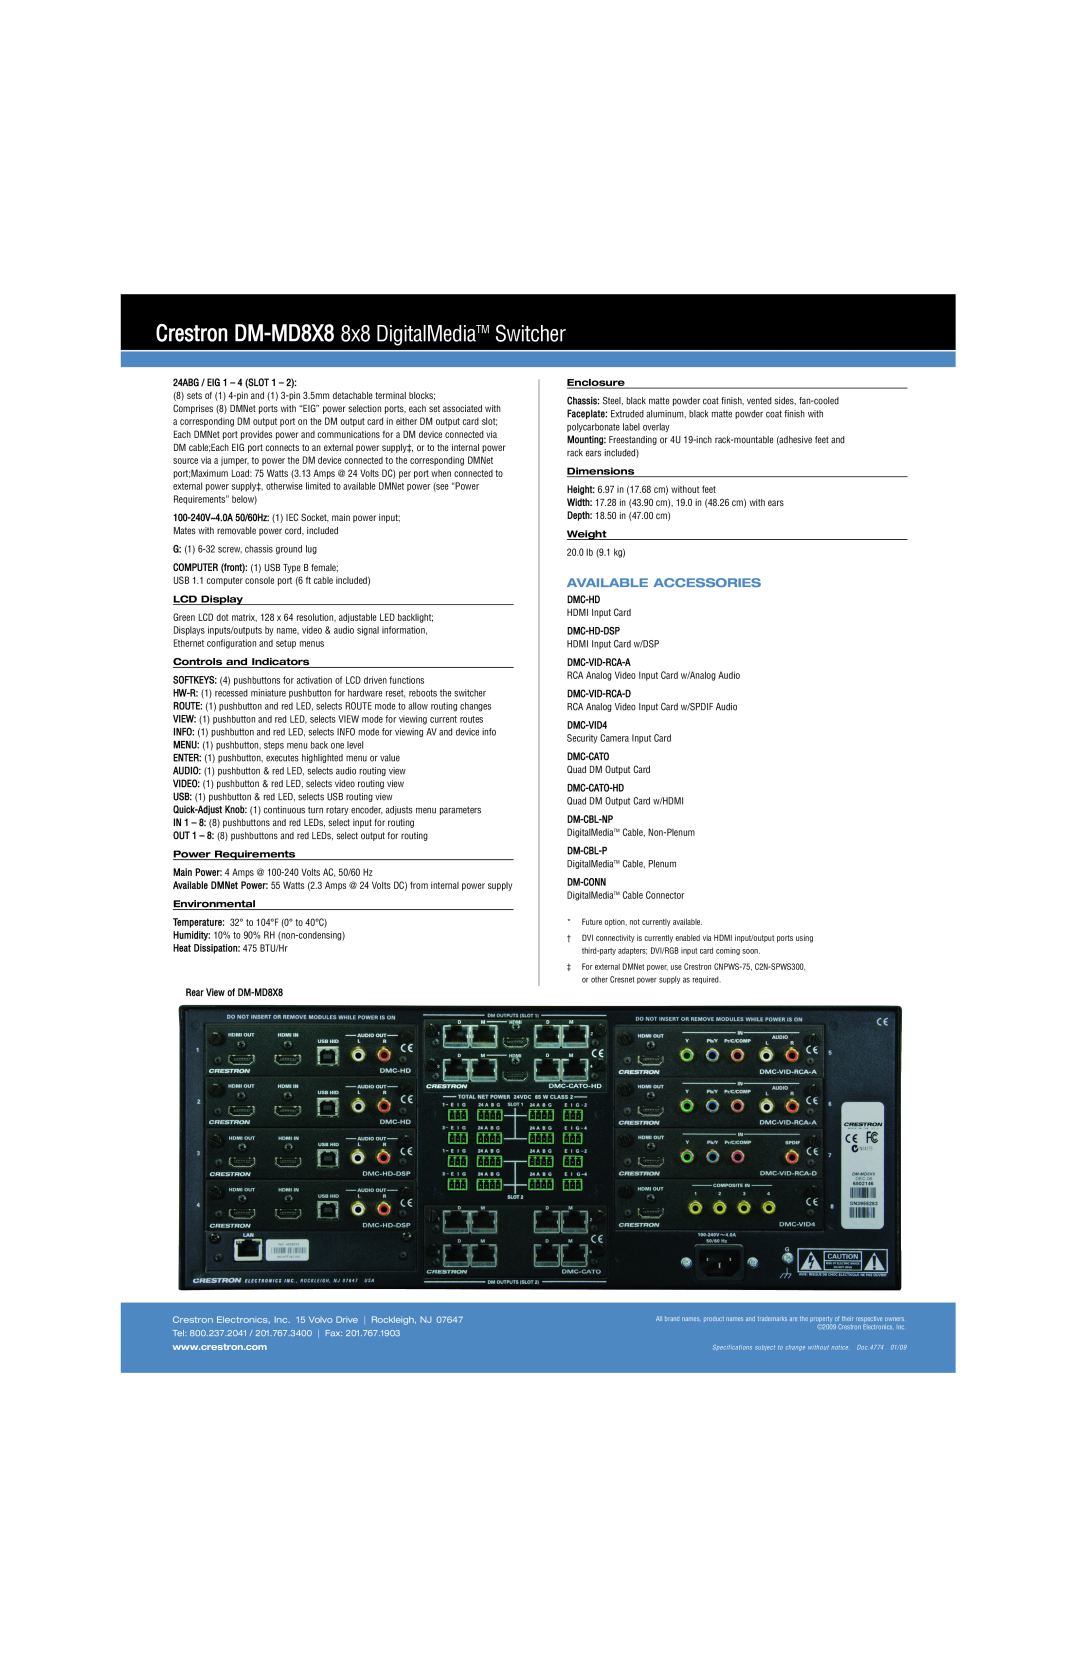 Crestron electronic Available Accessories, Crestron DM-MD8X8 8x8 DigitalMediaTM Switcher, LCD Display, Environmental 